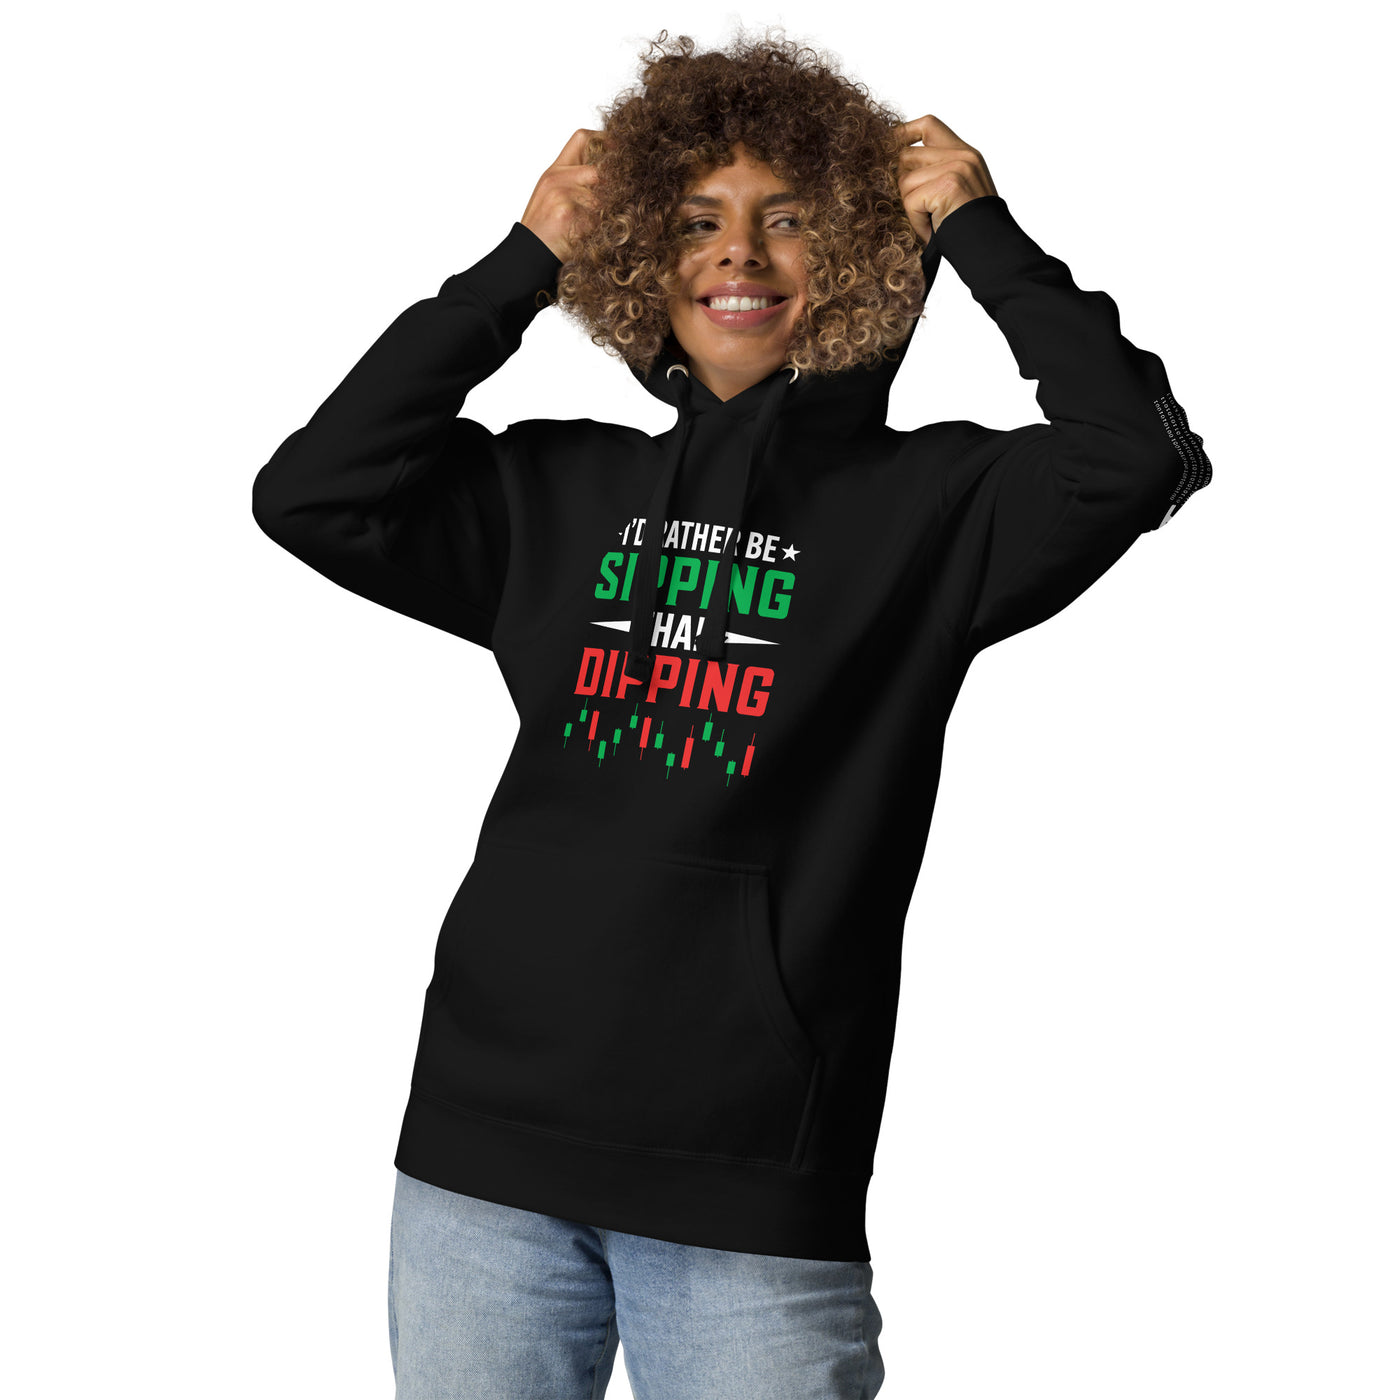 I'd rather be Sipping than Dipping - Unisex Hoodie